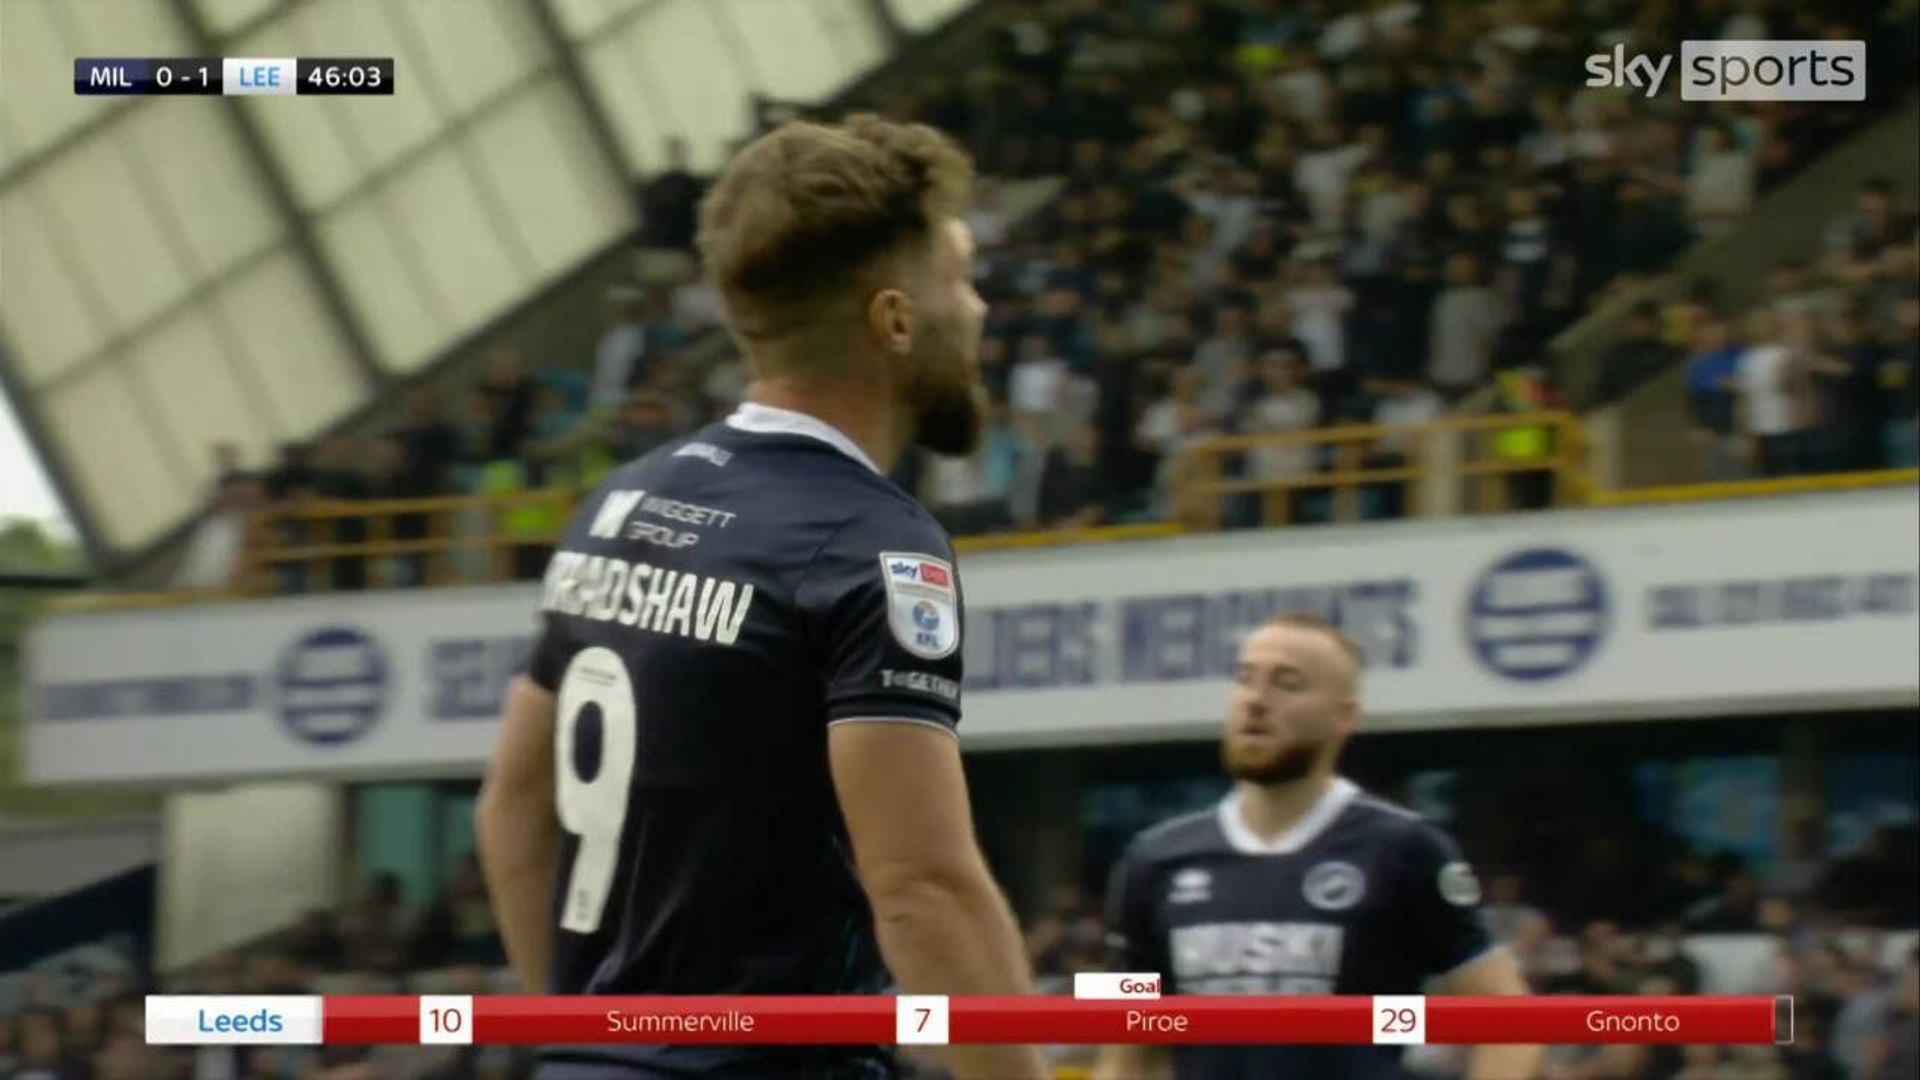 Millwall's Bradshaw spurns chance to score equaliser